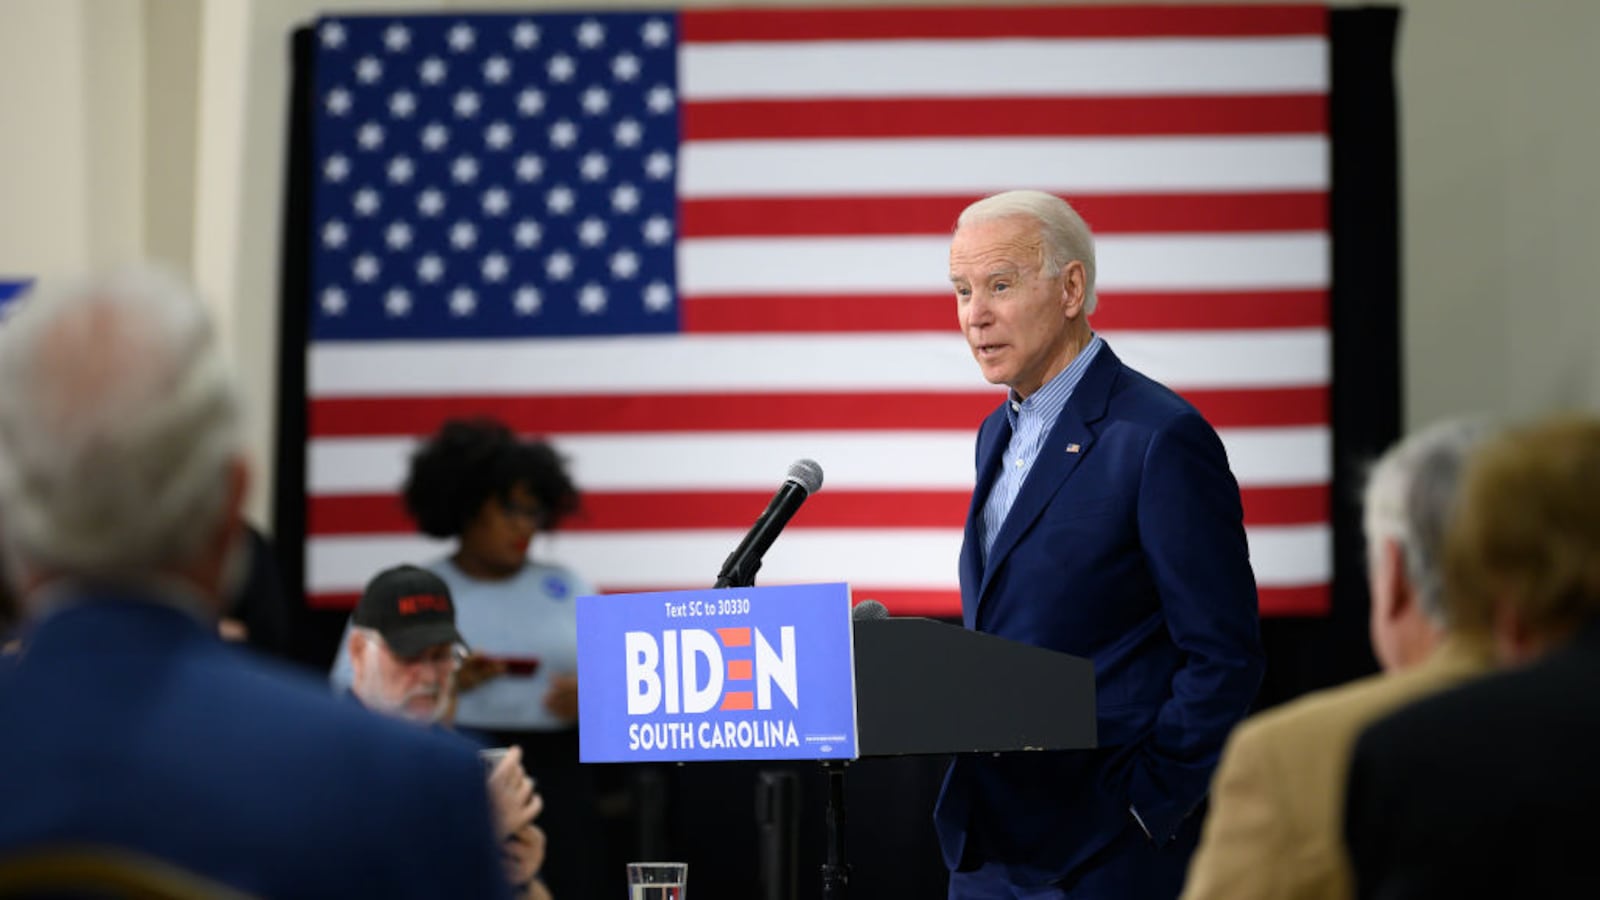 Democratic presidential candidate Joe Biden speaks at a town hall meeting in Sumter, South Carolina in February 2020.